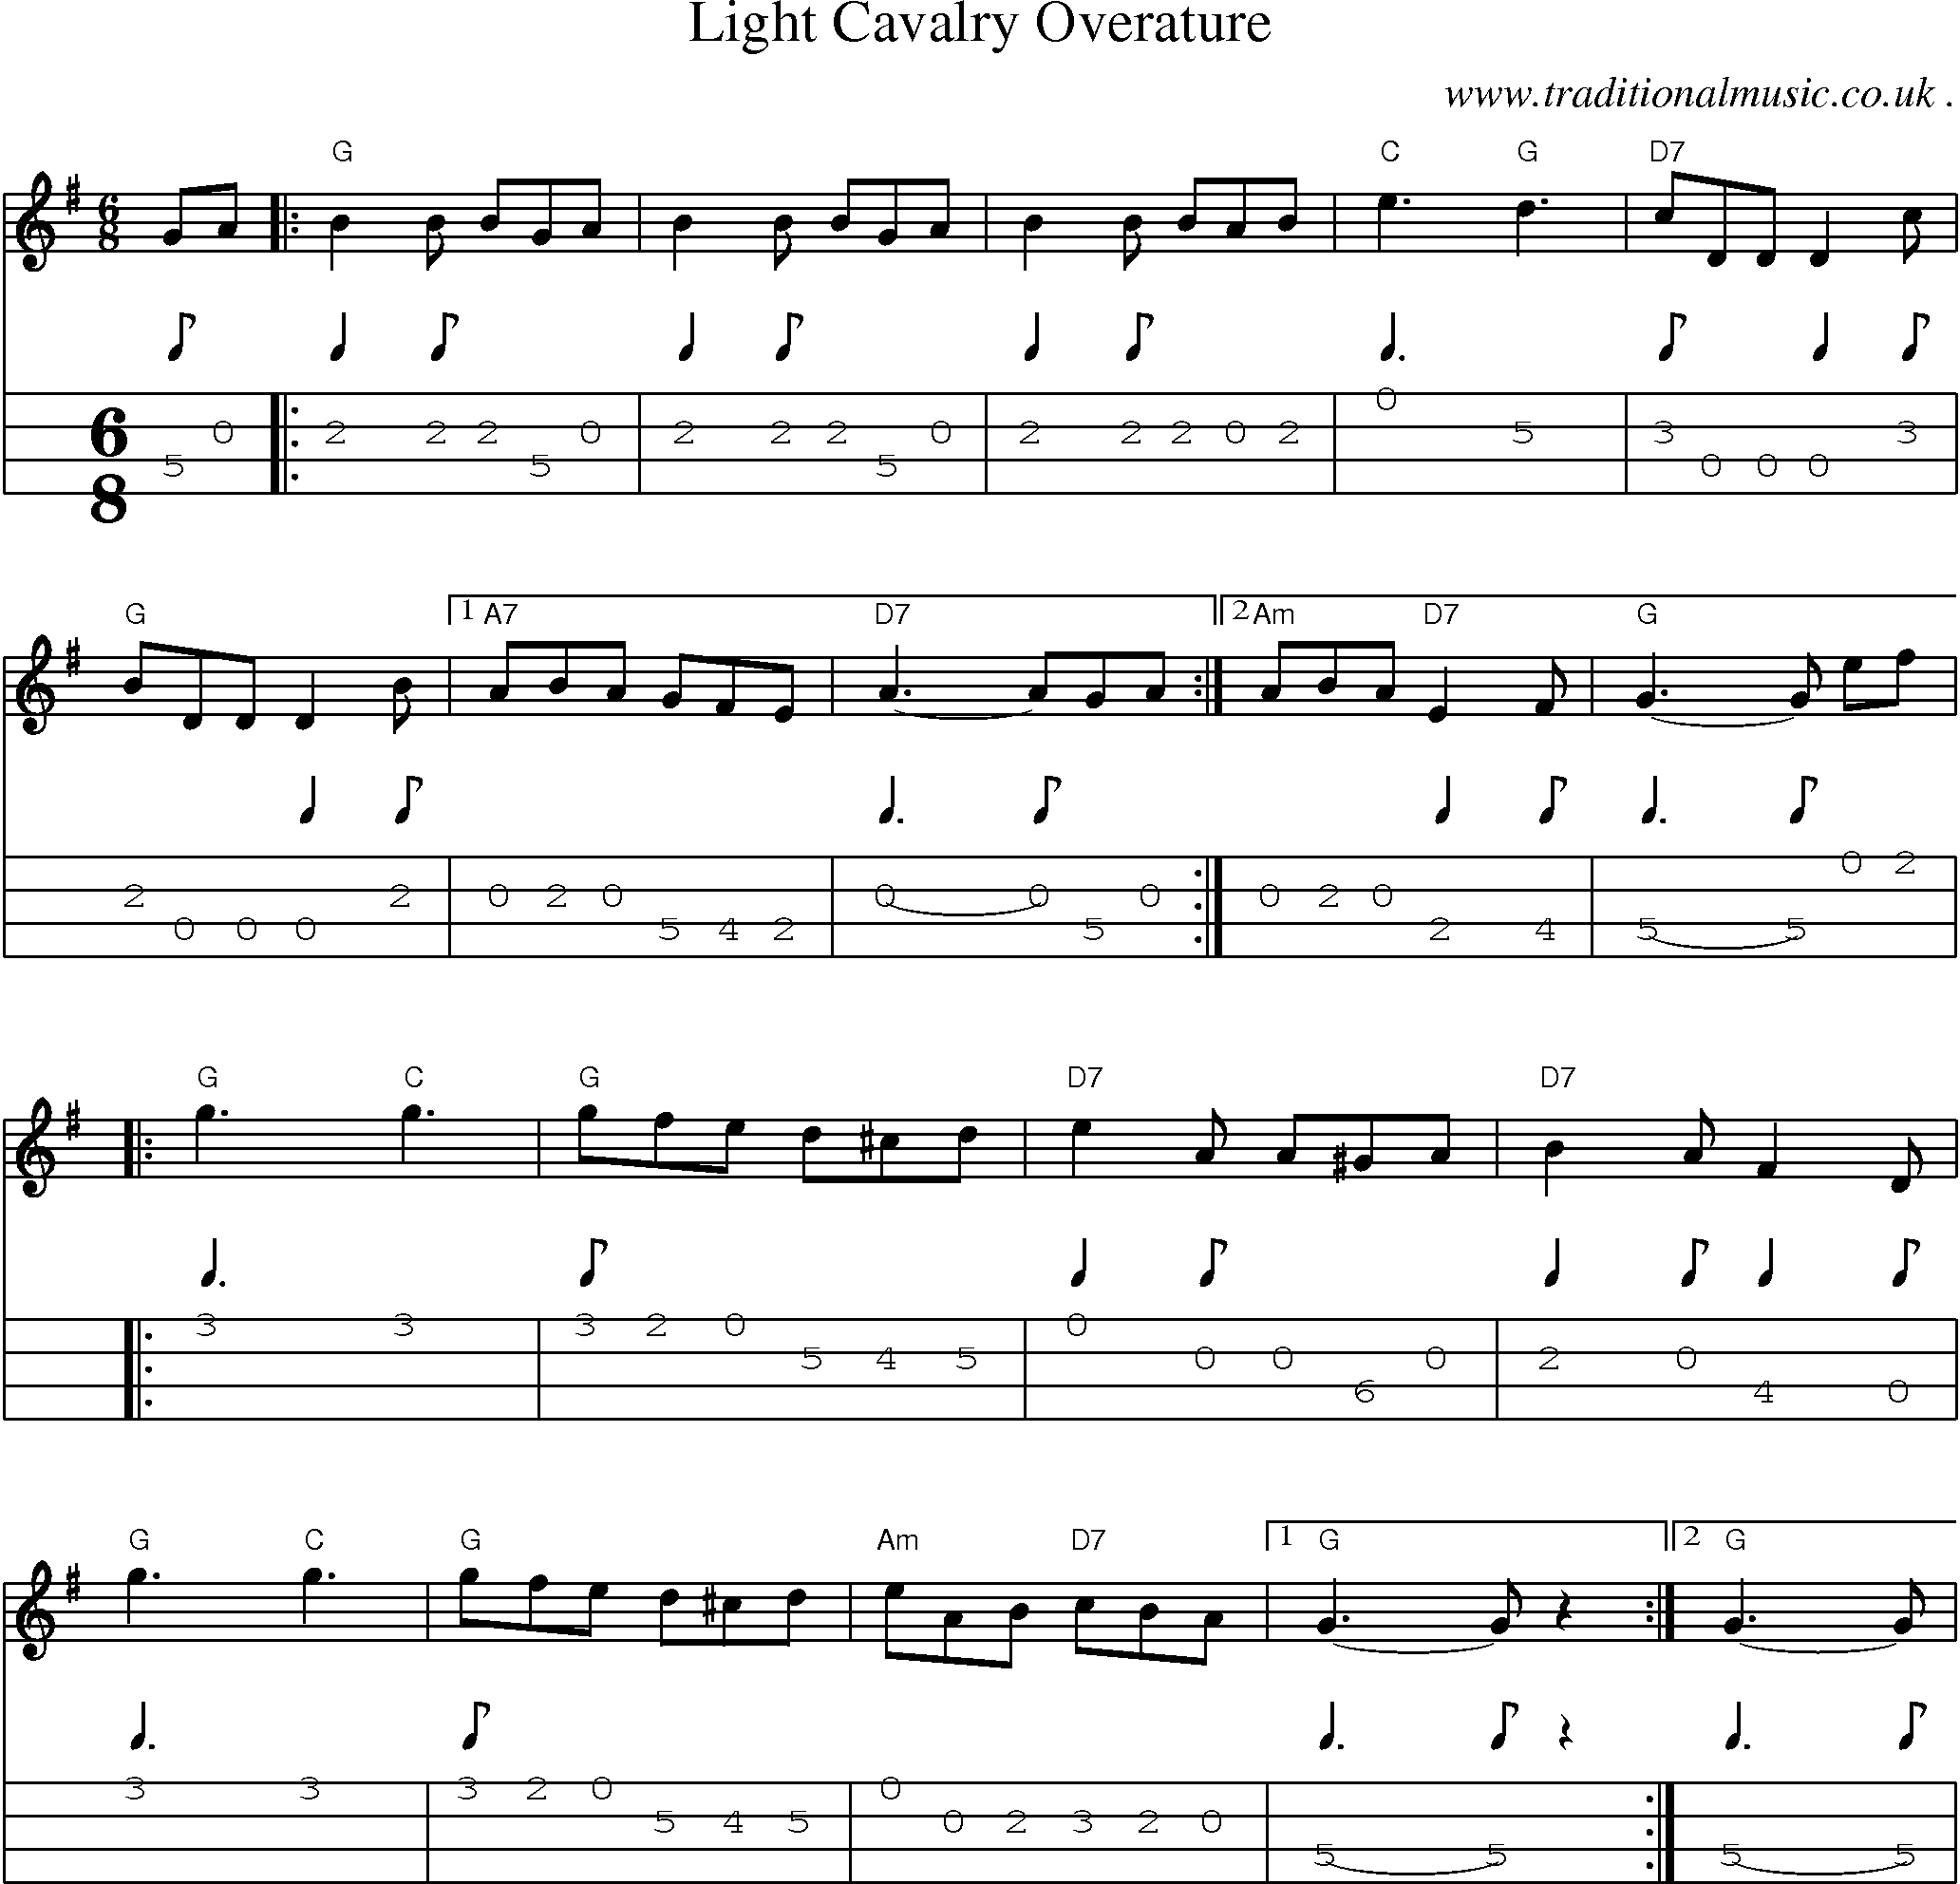 Music Score and Guitar Tabs for Light Cavalry Overature